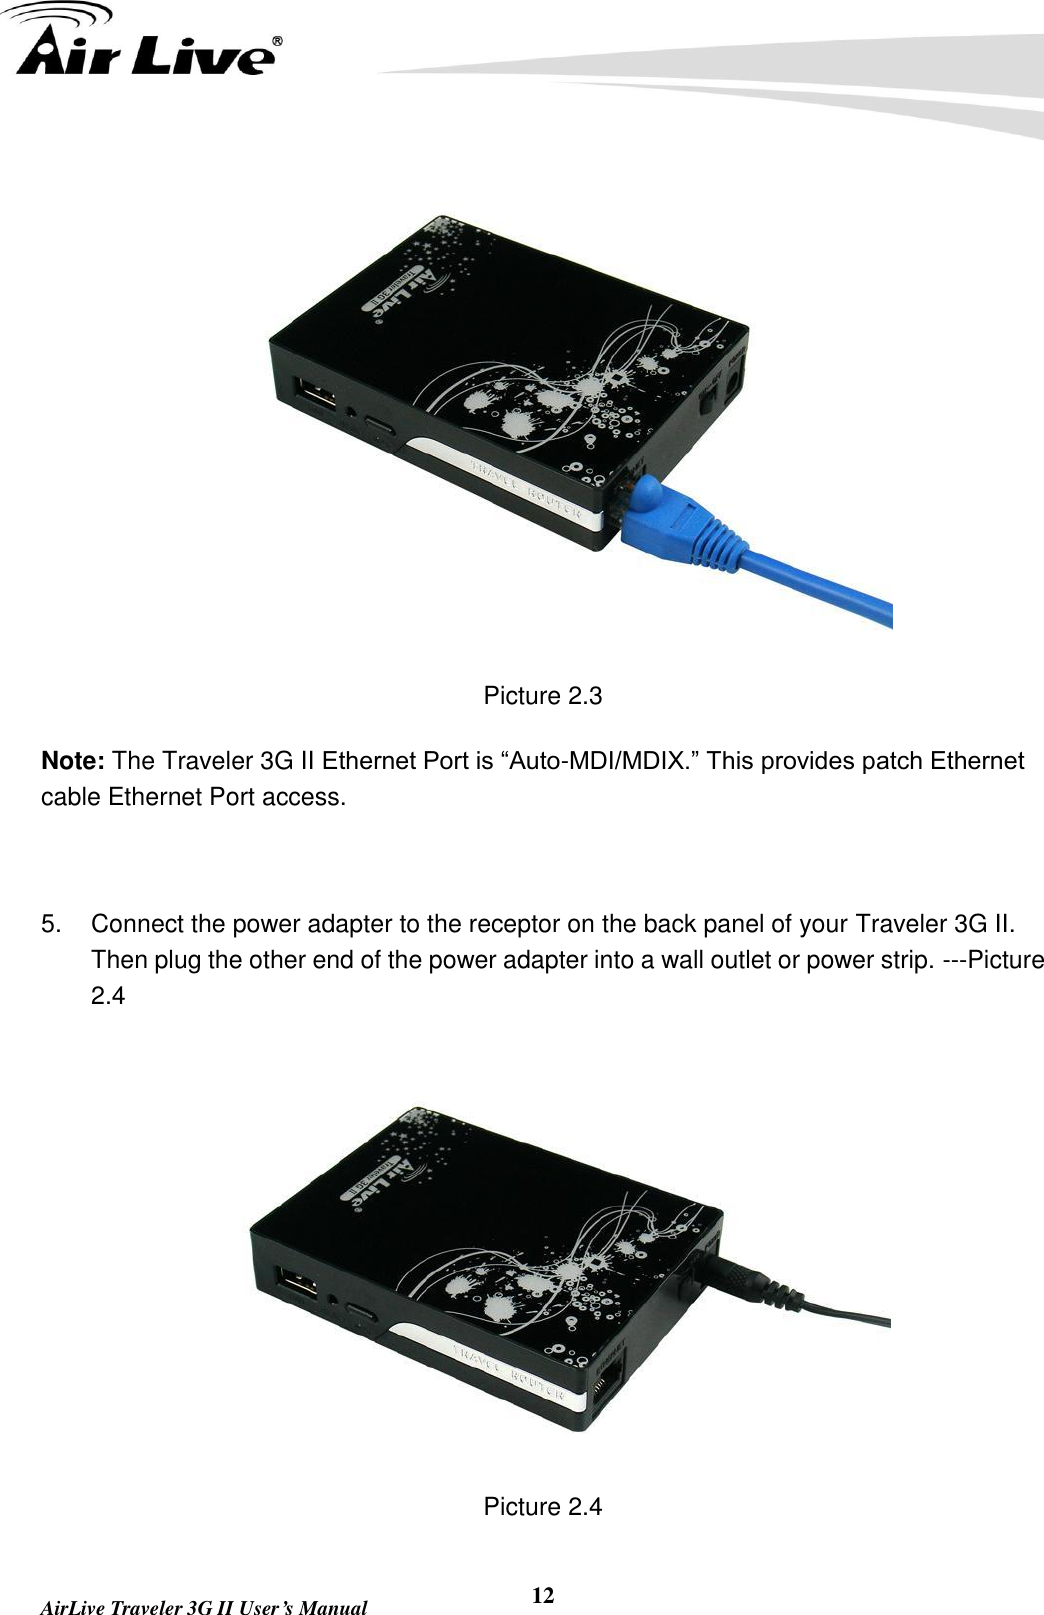   AirLive Traveler 3G II User’s Manual 12  Picture 2.3 Note: The Traveler 3G II Ethernet Port is “Auto-MDI/MDIX.” This provides patch Ethernet cable Ethernet Port access.  5.  Connect the power adapter to the receptor on the back panel of your Traveler 3G II. Then plug the other end of the power adapter into a wall outlet or power strip. ---Picture 2.4  Picture 2.4 